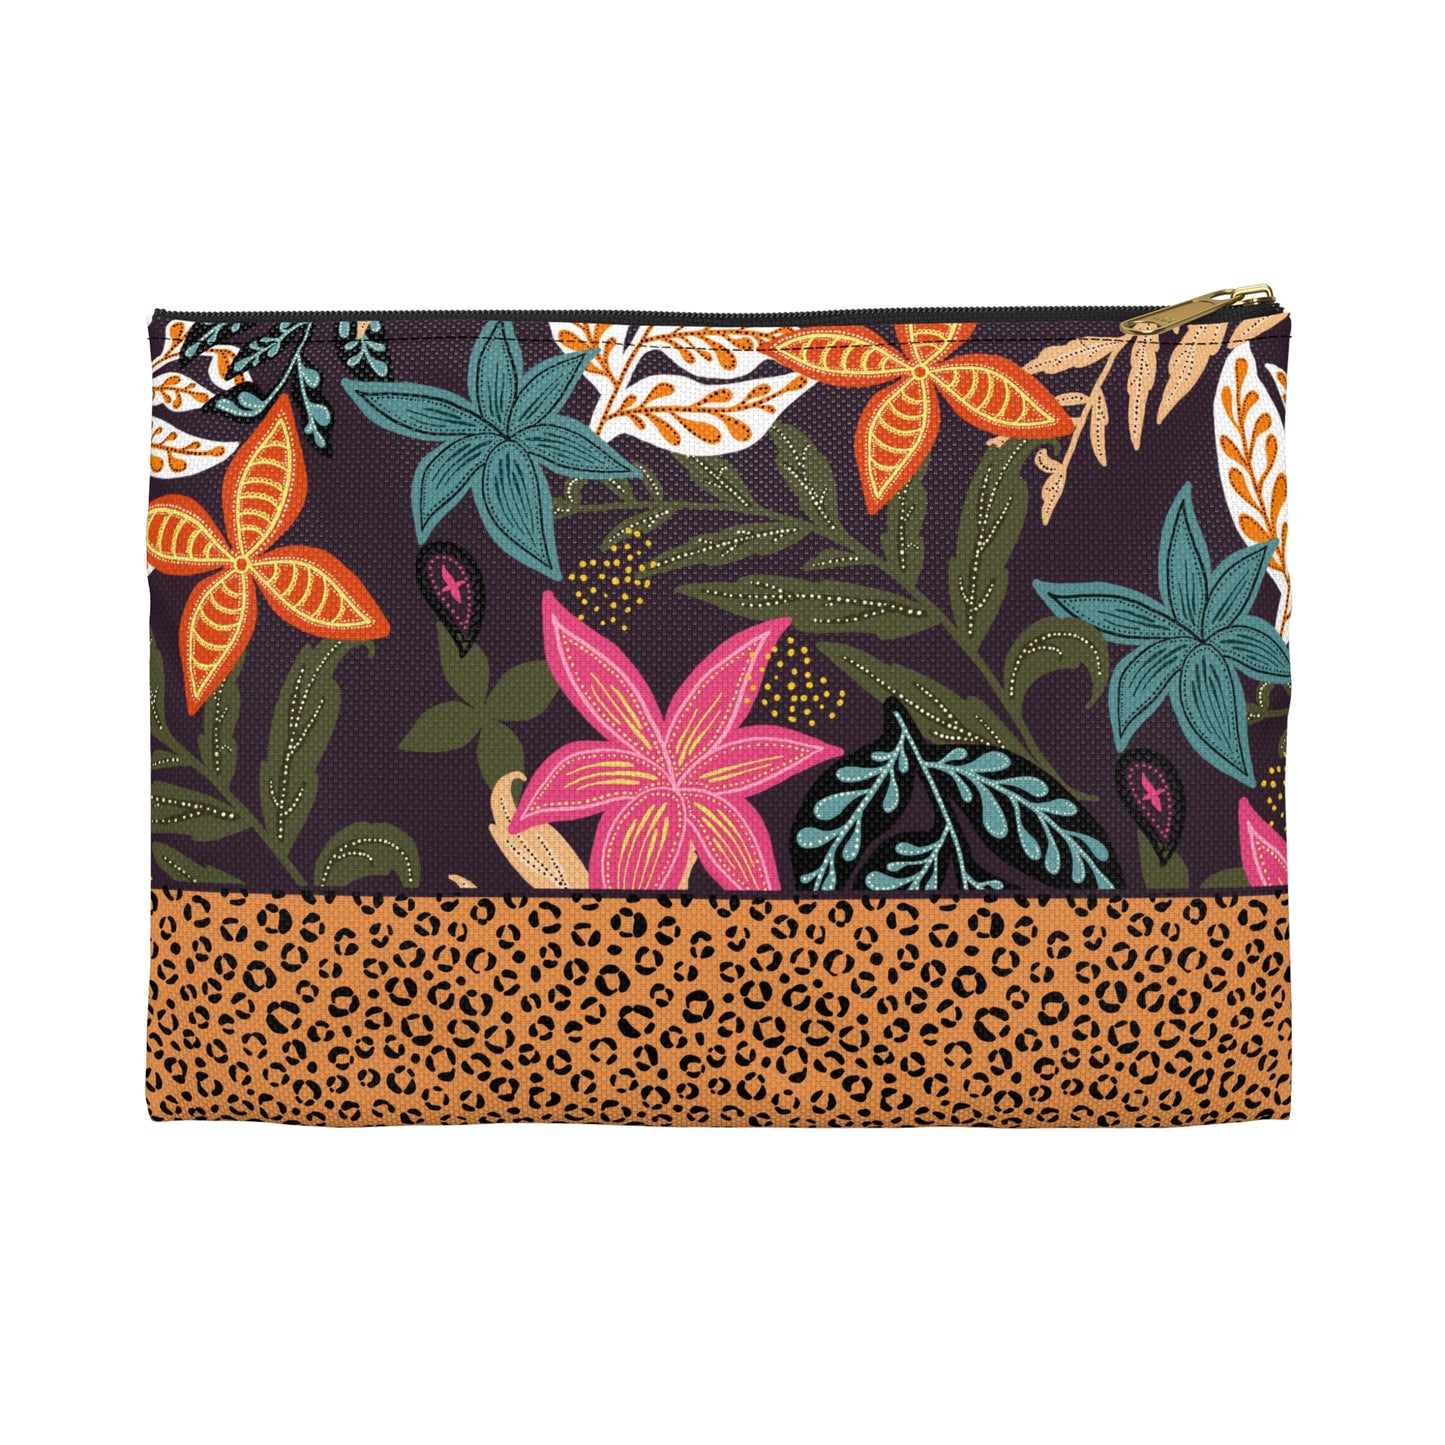 SUMMER JUNGLE Accessory Pouch: Toiletries Bag, On-the-go Items, Everyday Bag